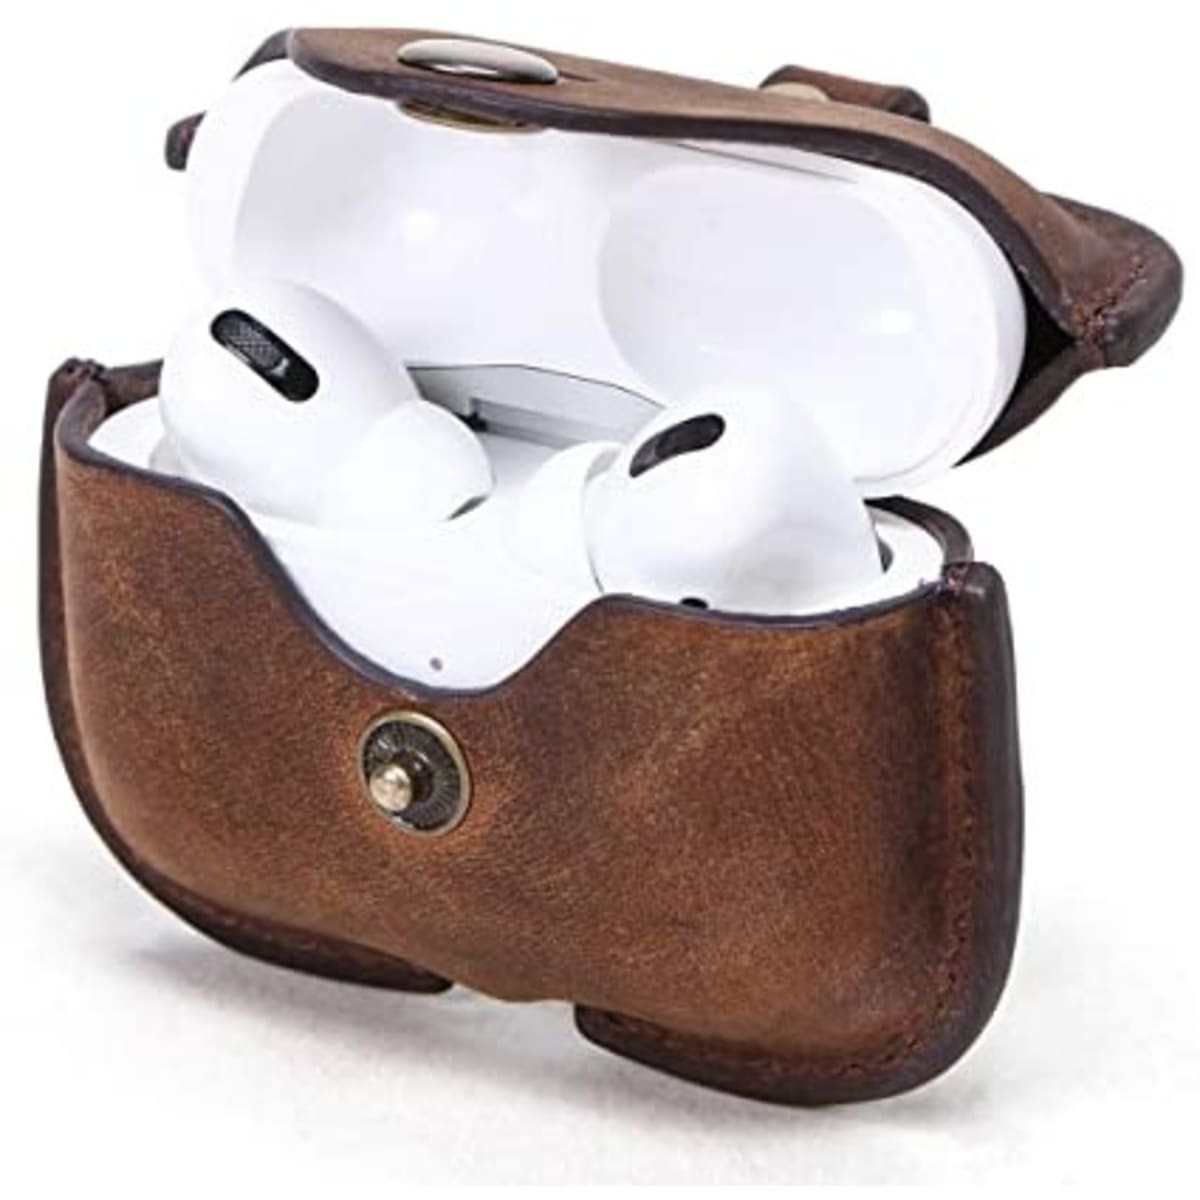 Retro Case for Airpods Pro Protective Case for Airpods Case 